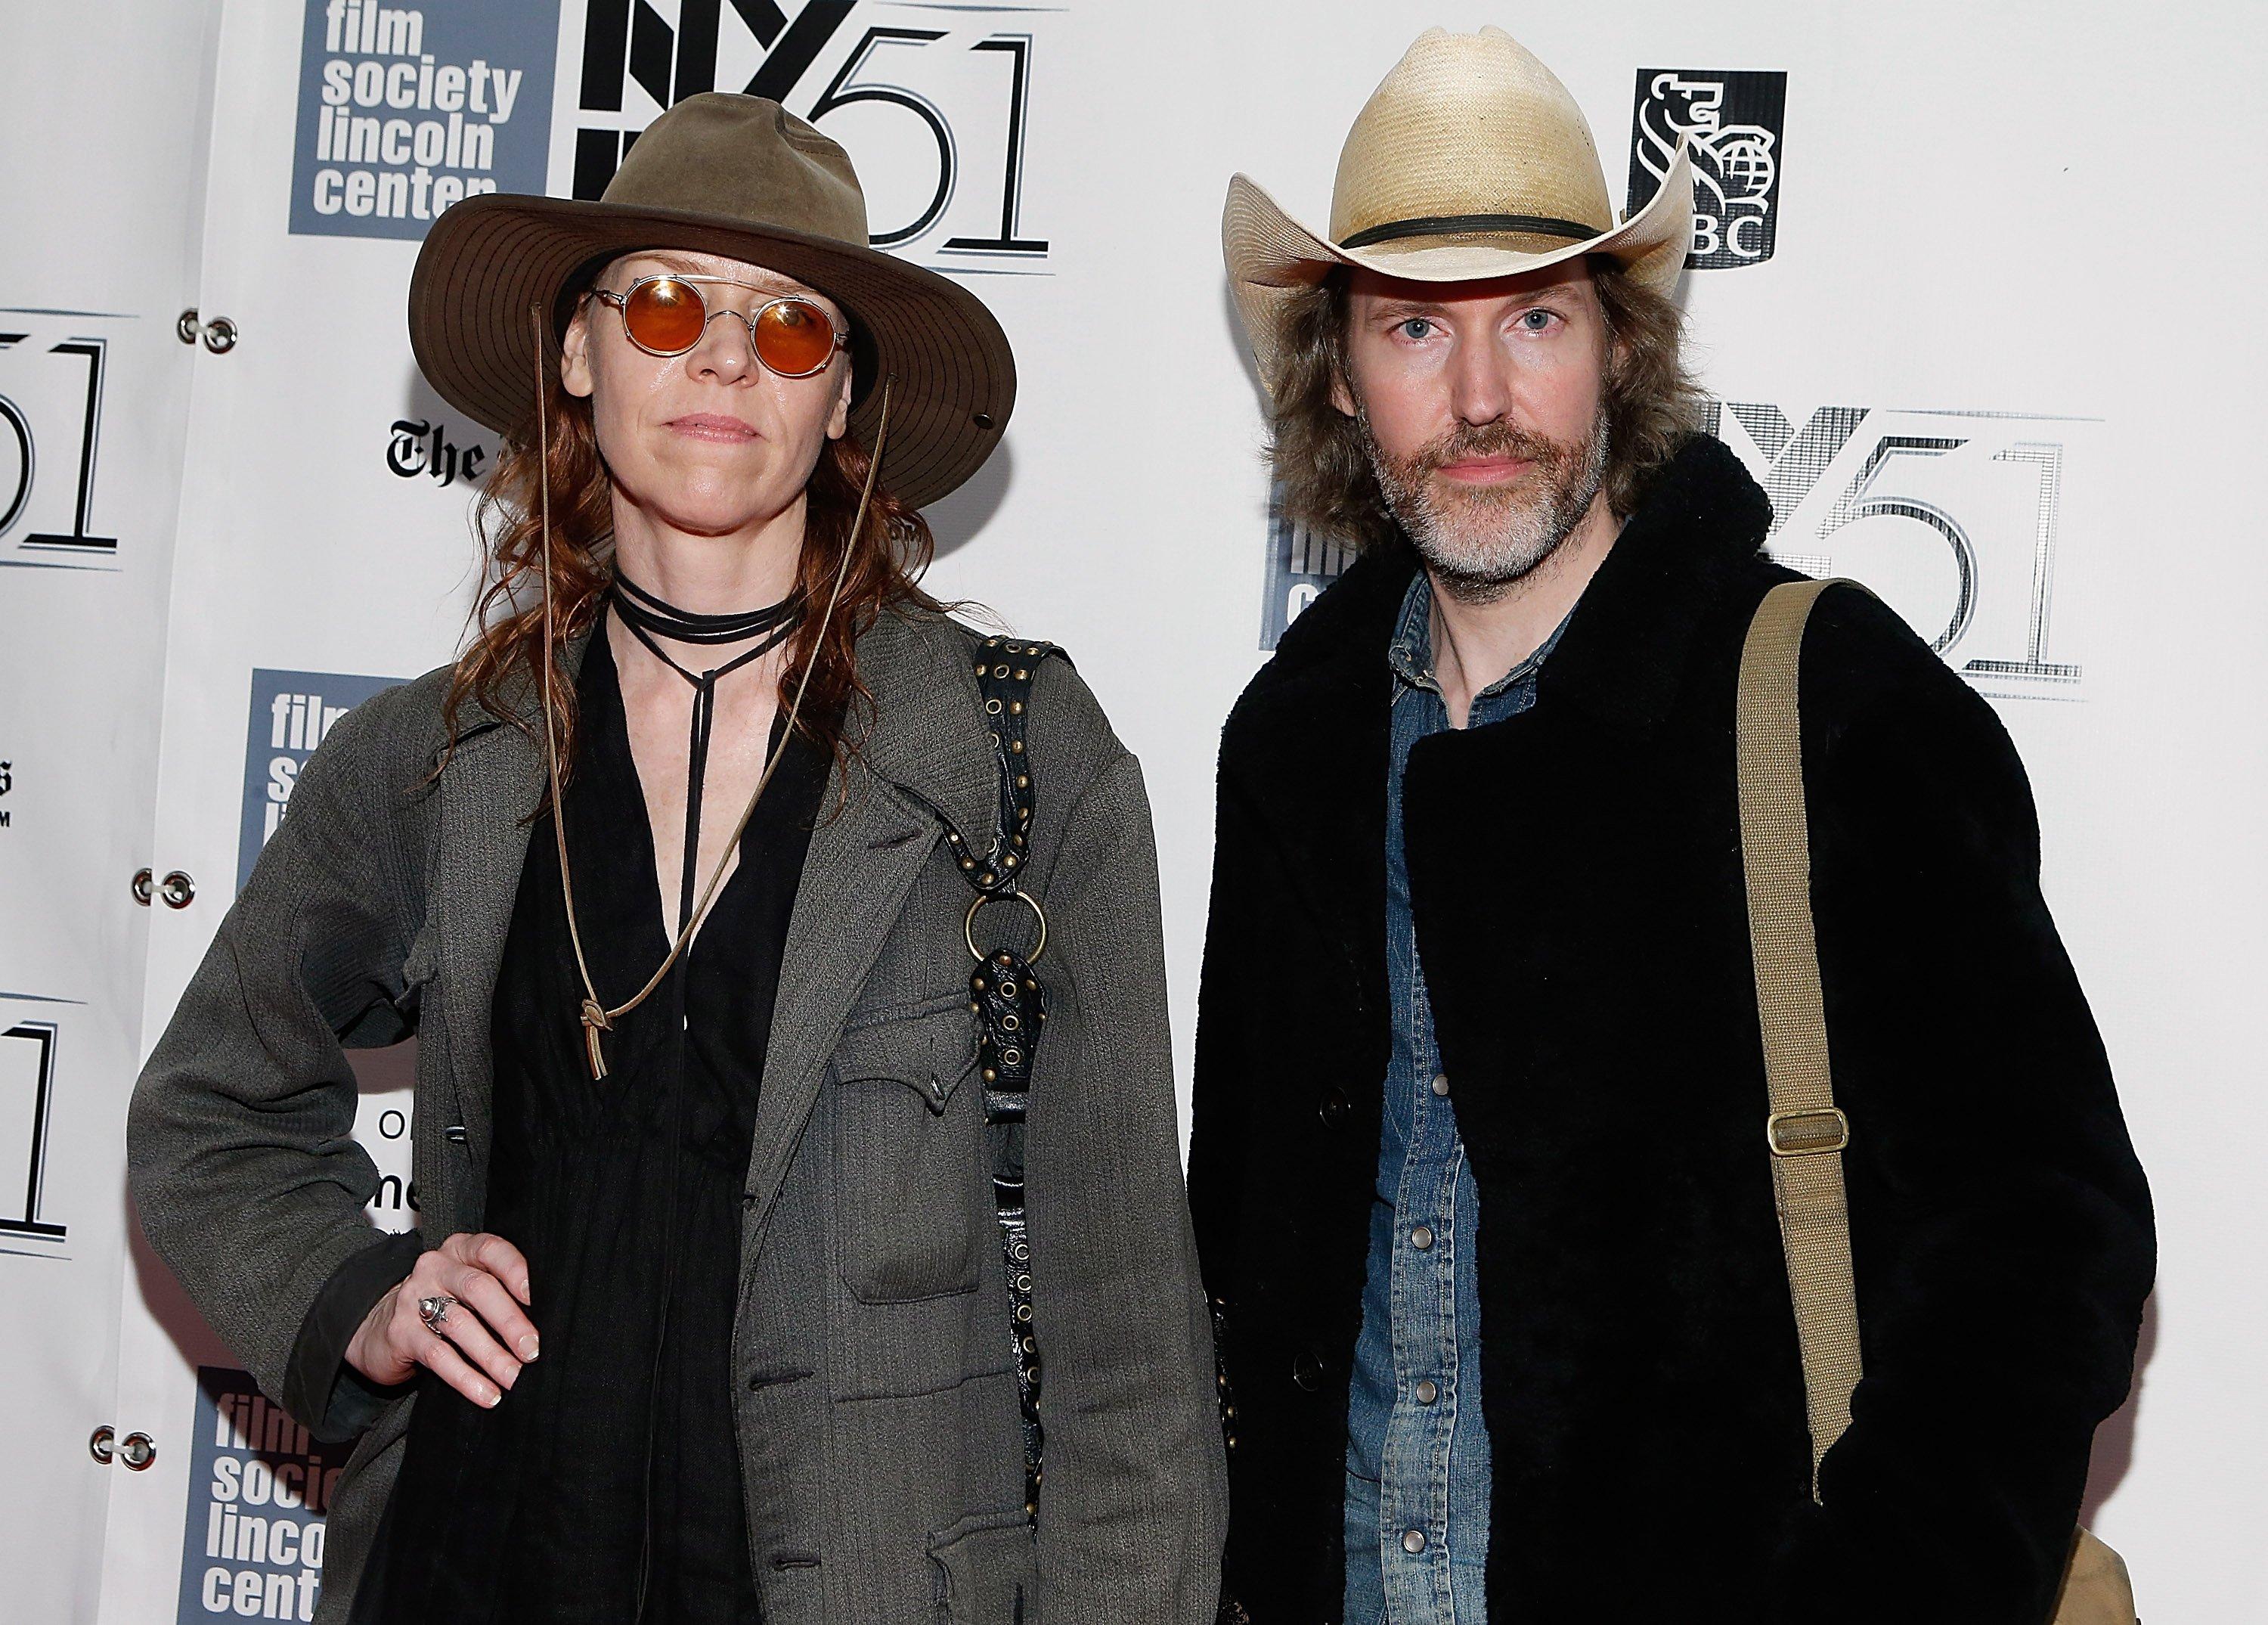 Gillian Welch and David Rawlings on red carpet